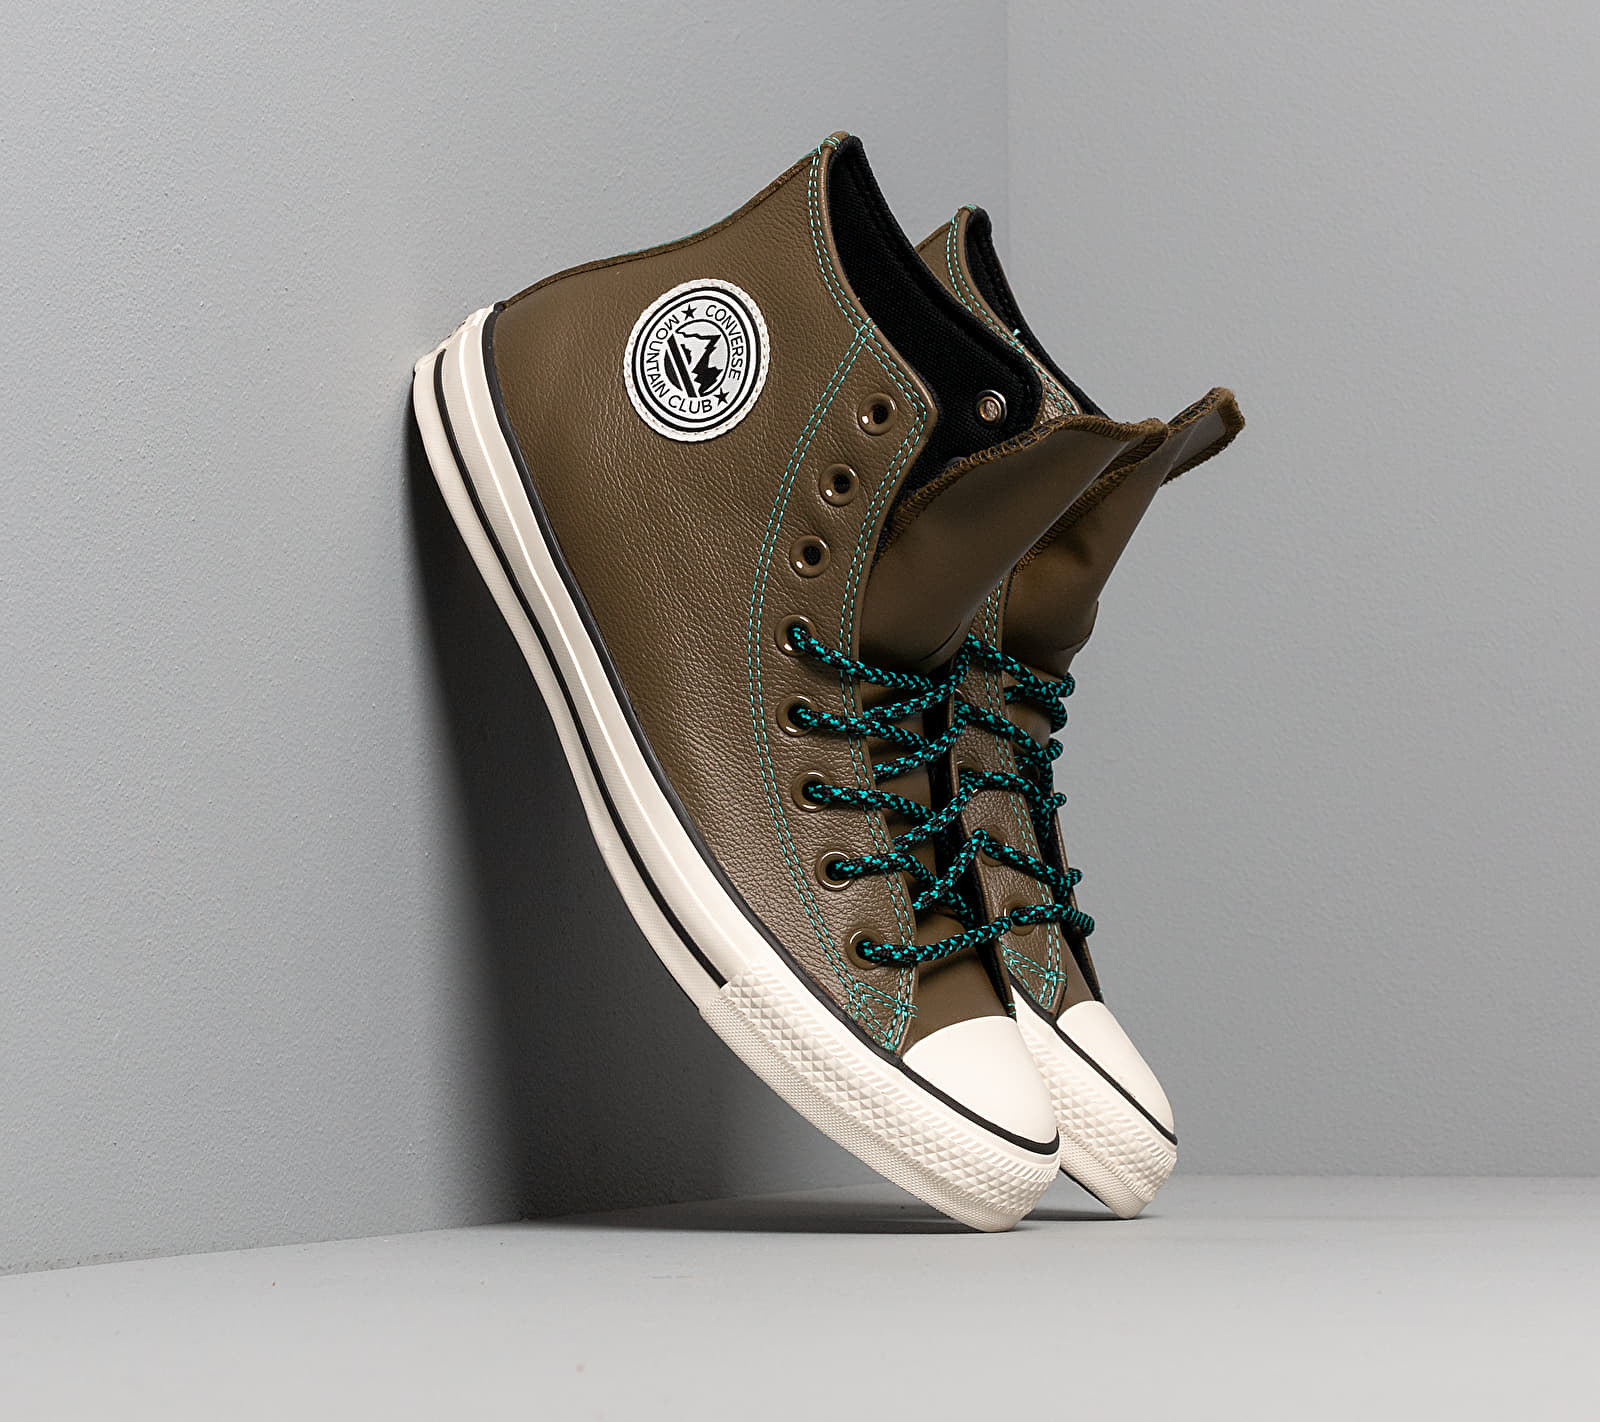 Converse Chuck Taylor All Star Archival Leather Surplus Olive/ Turbo Green/ Egre